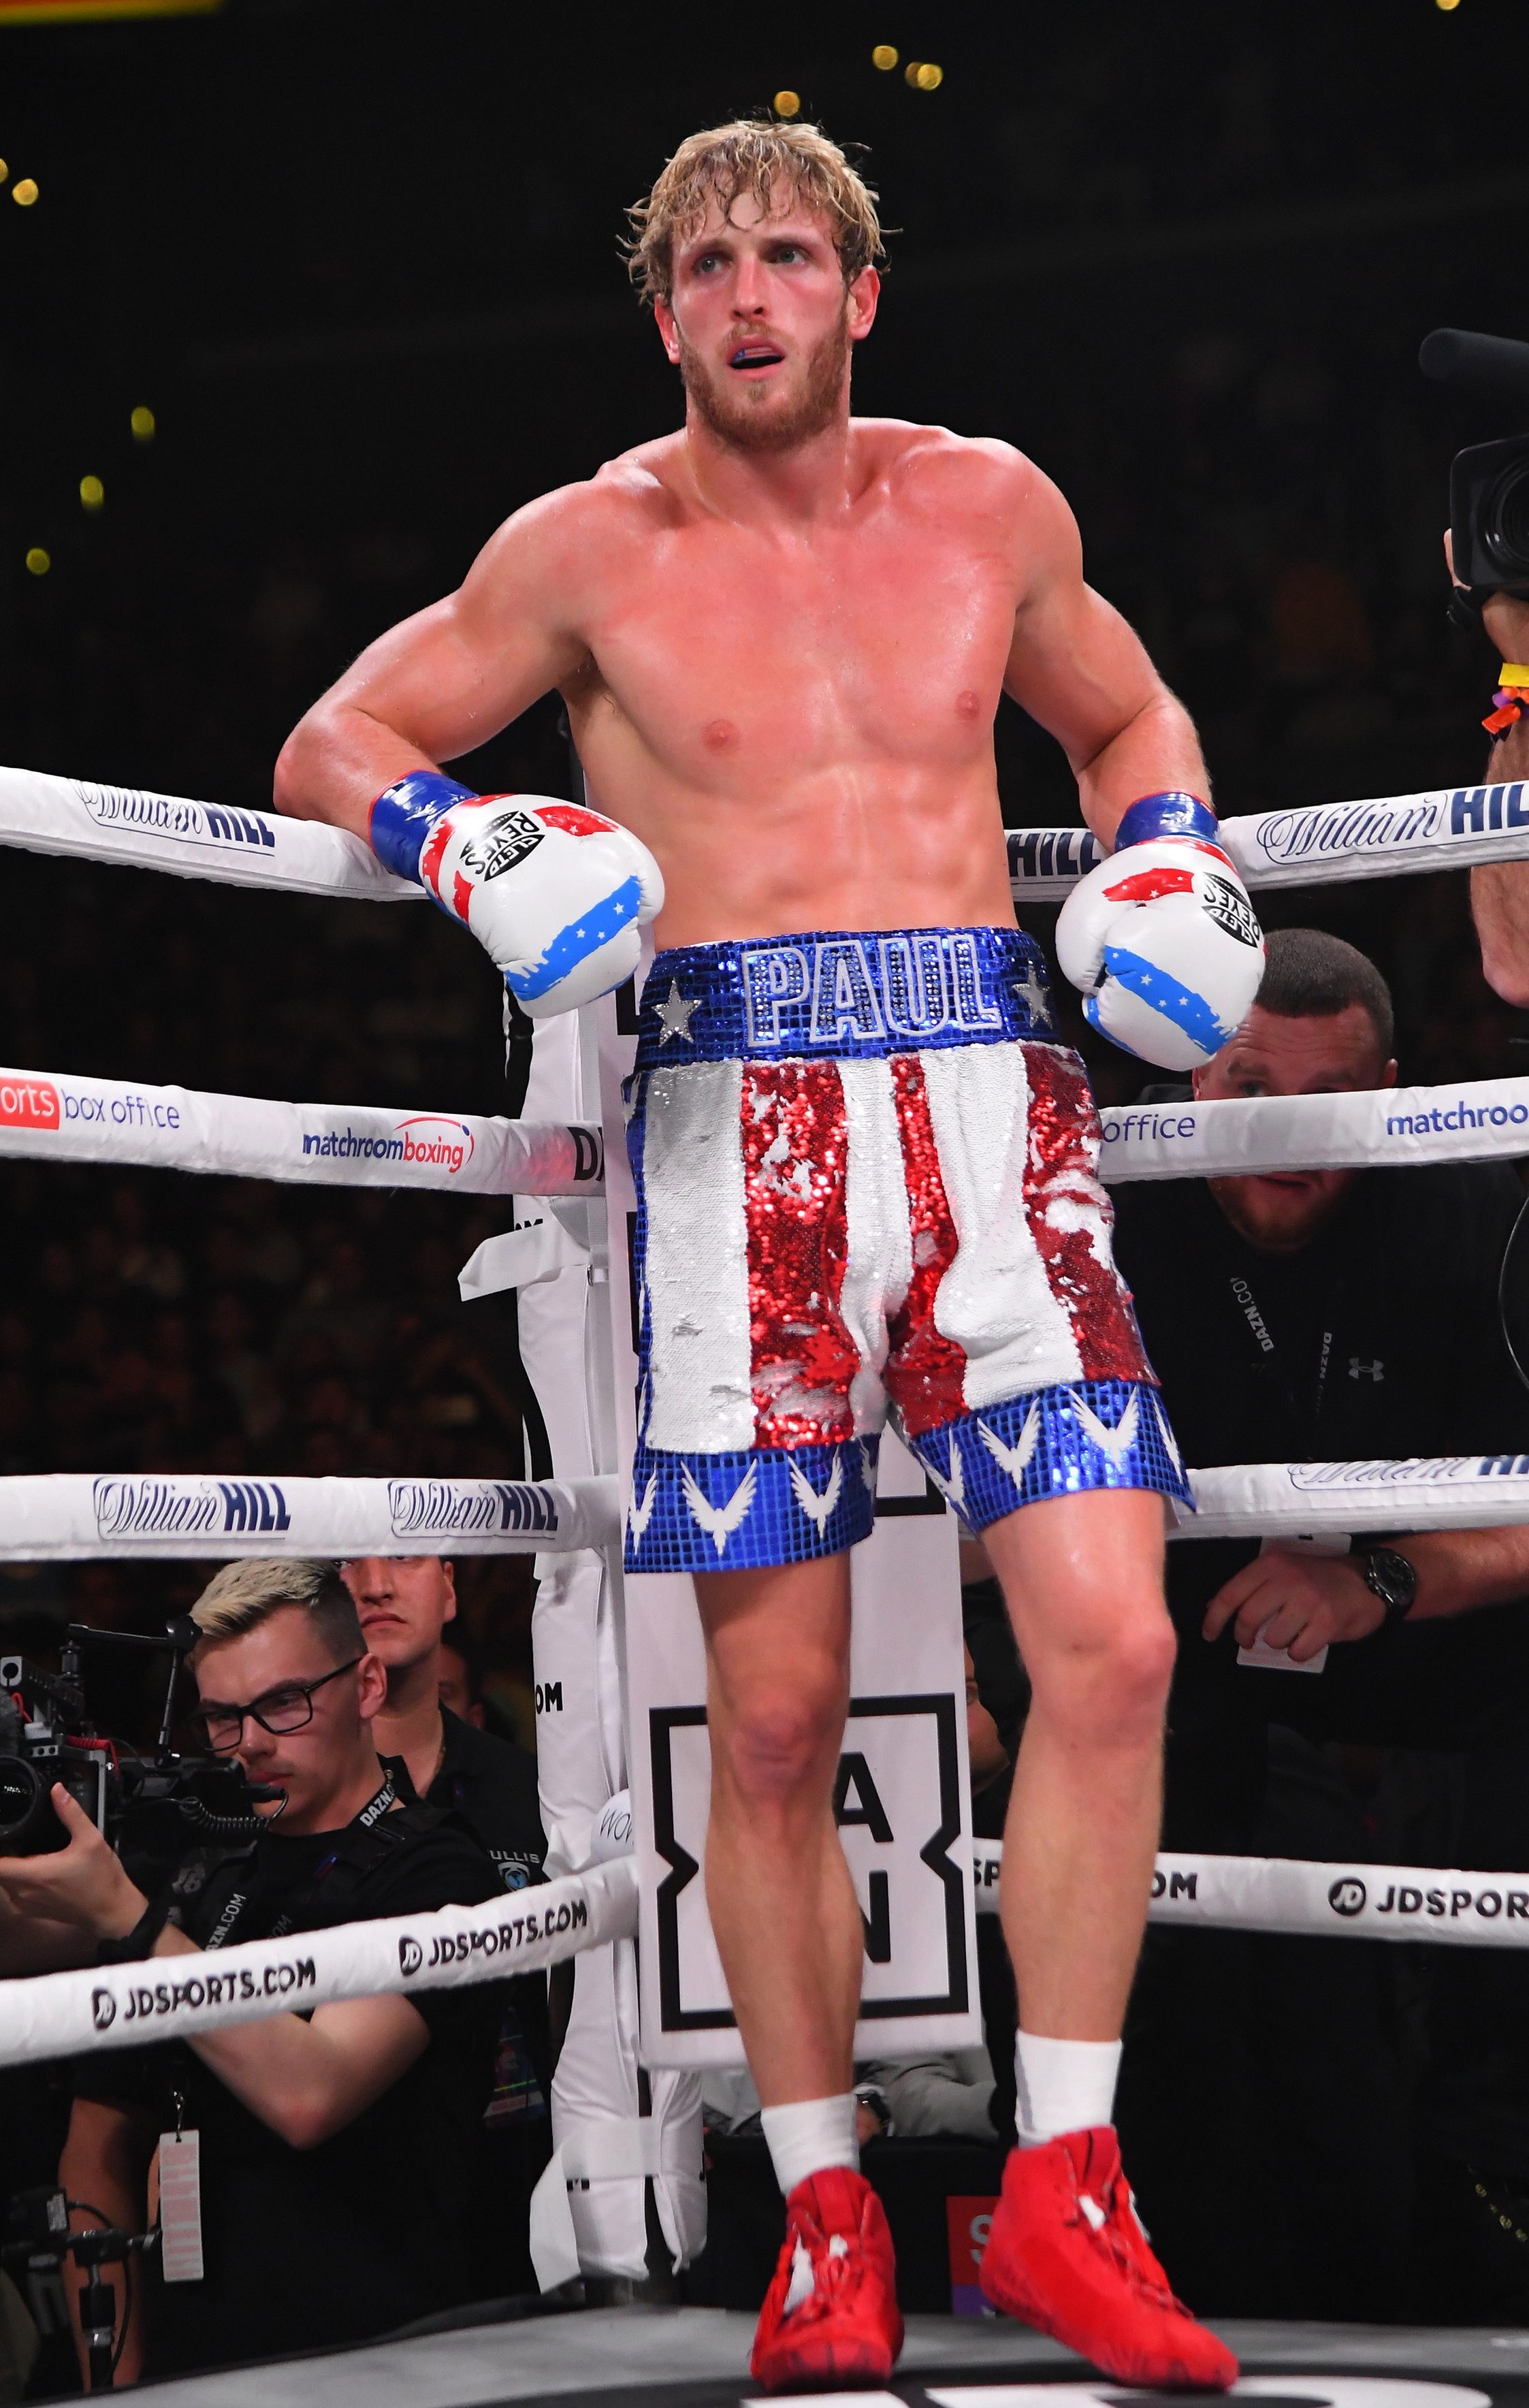 Jake Paul Claims All Boxing Is Fixed In X Rated Rant As He Struggles To Take Brother Logan's Loss To KSI